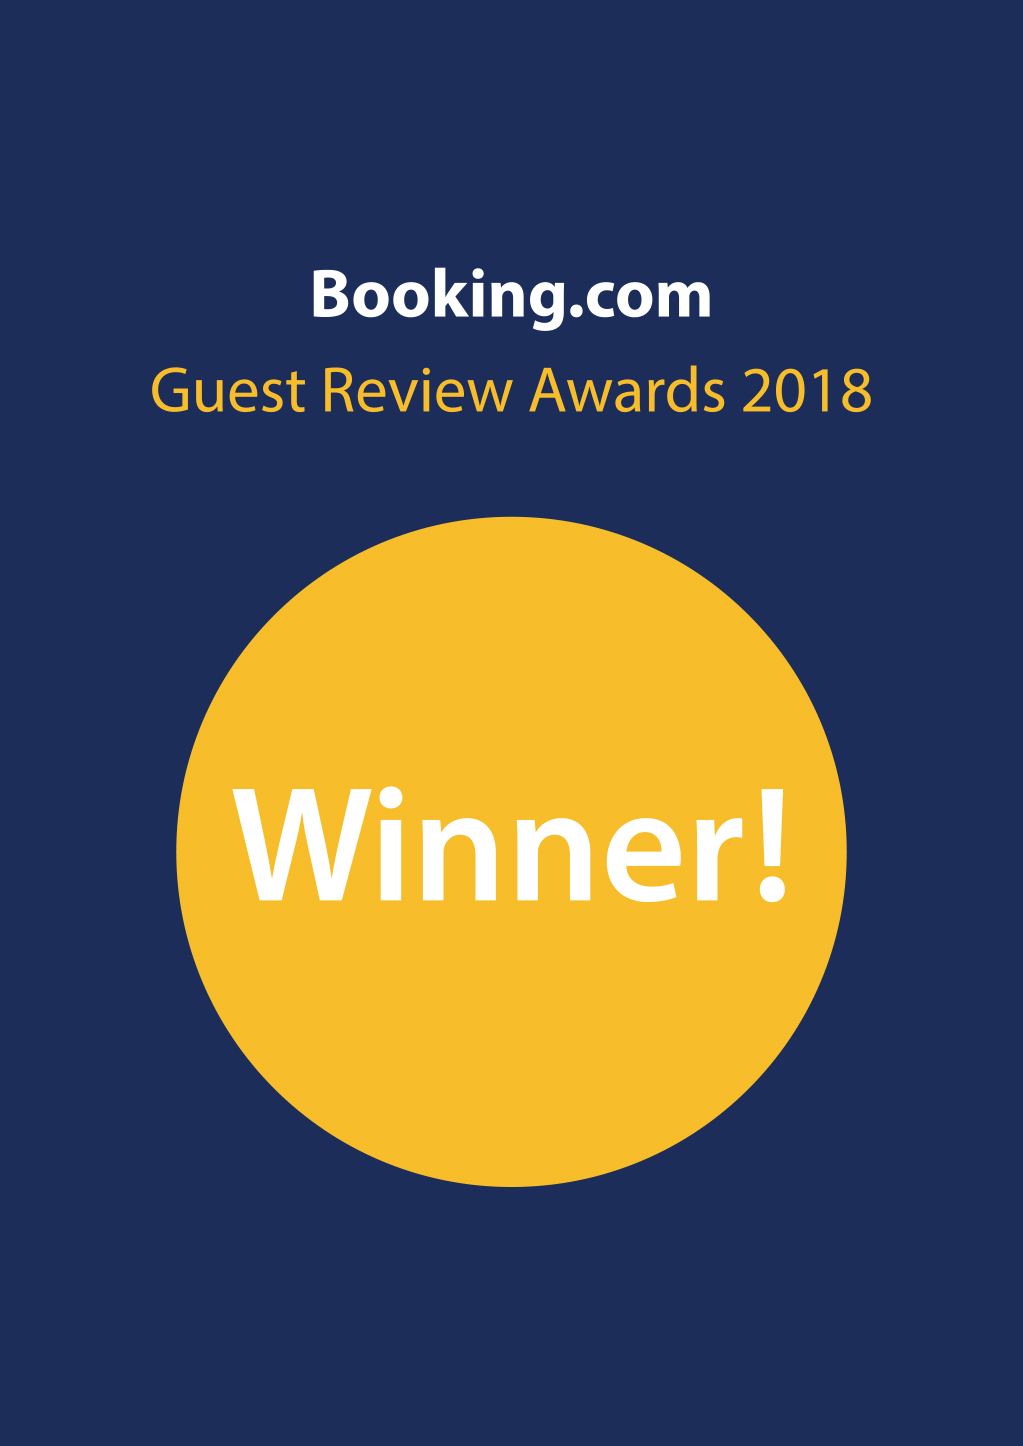 Booking.com - Guest Review Awards - 2018